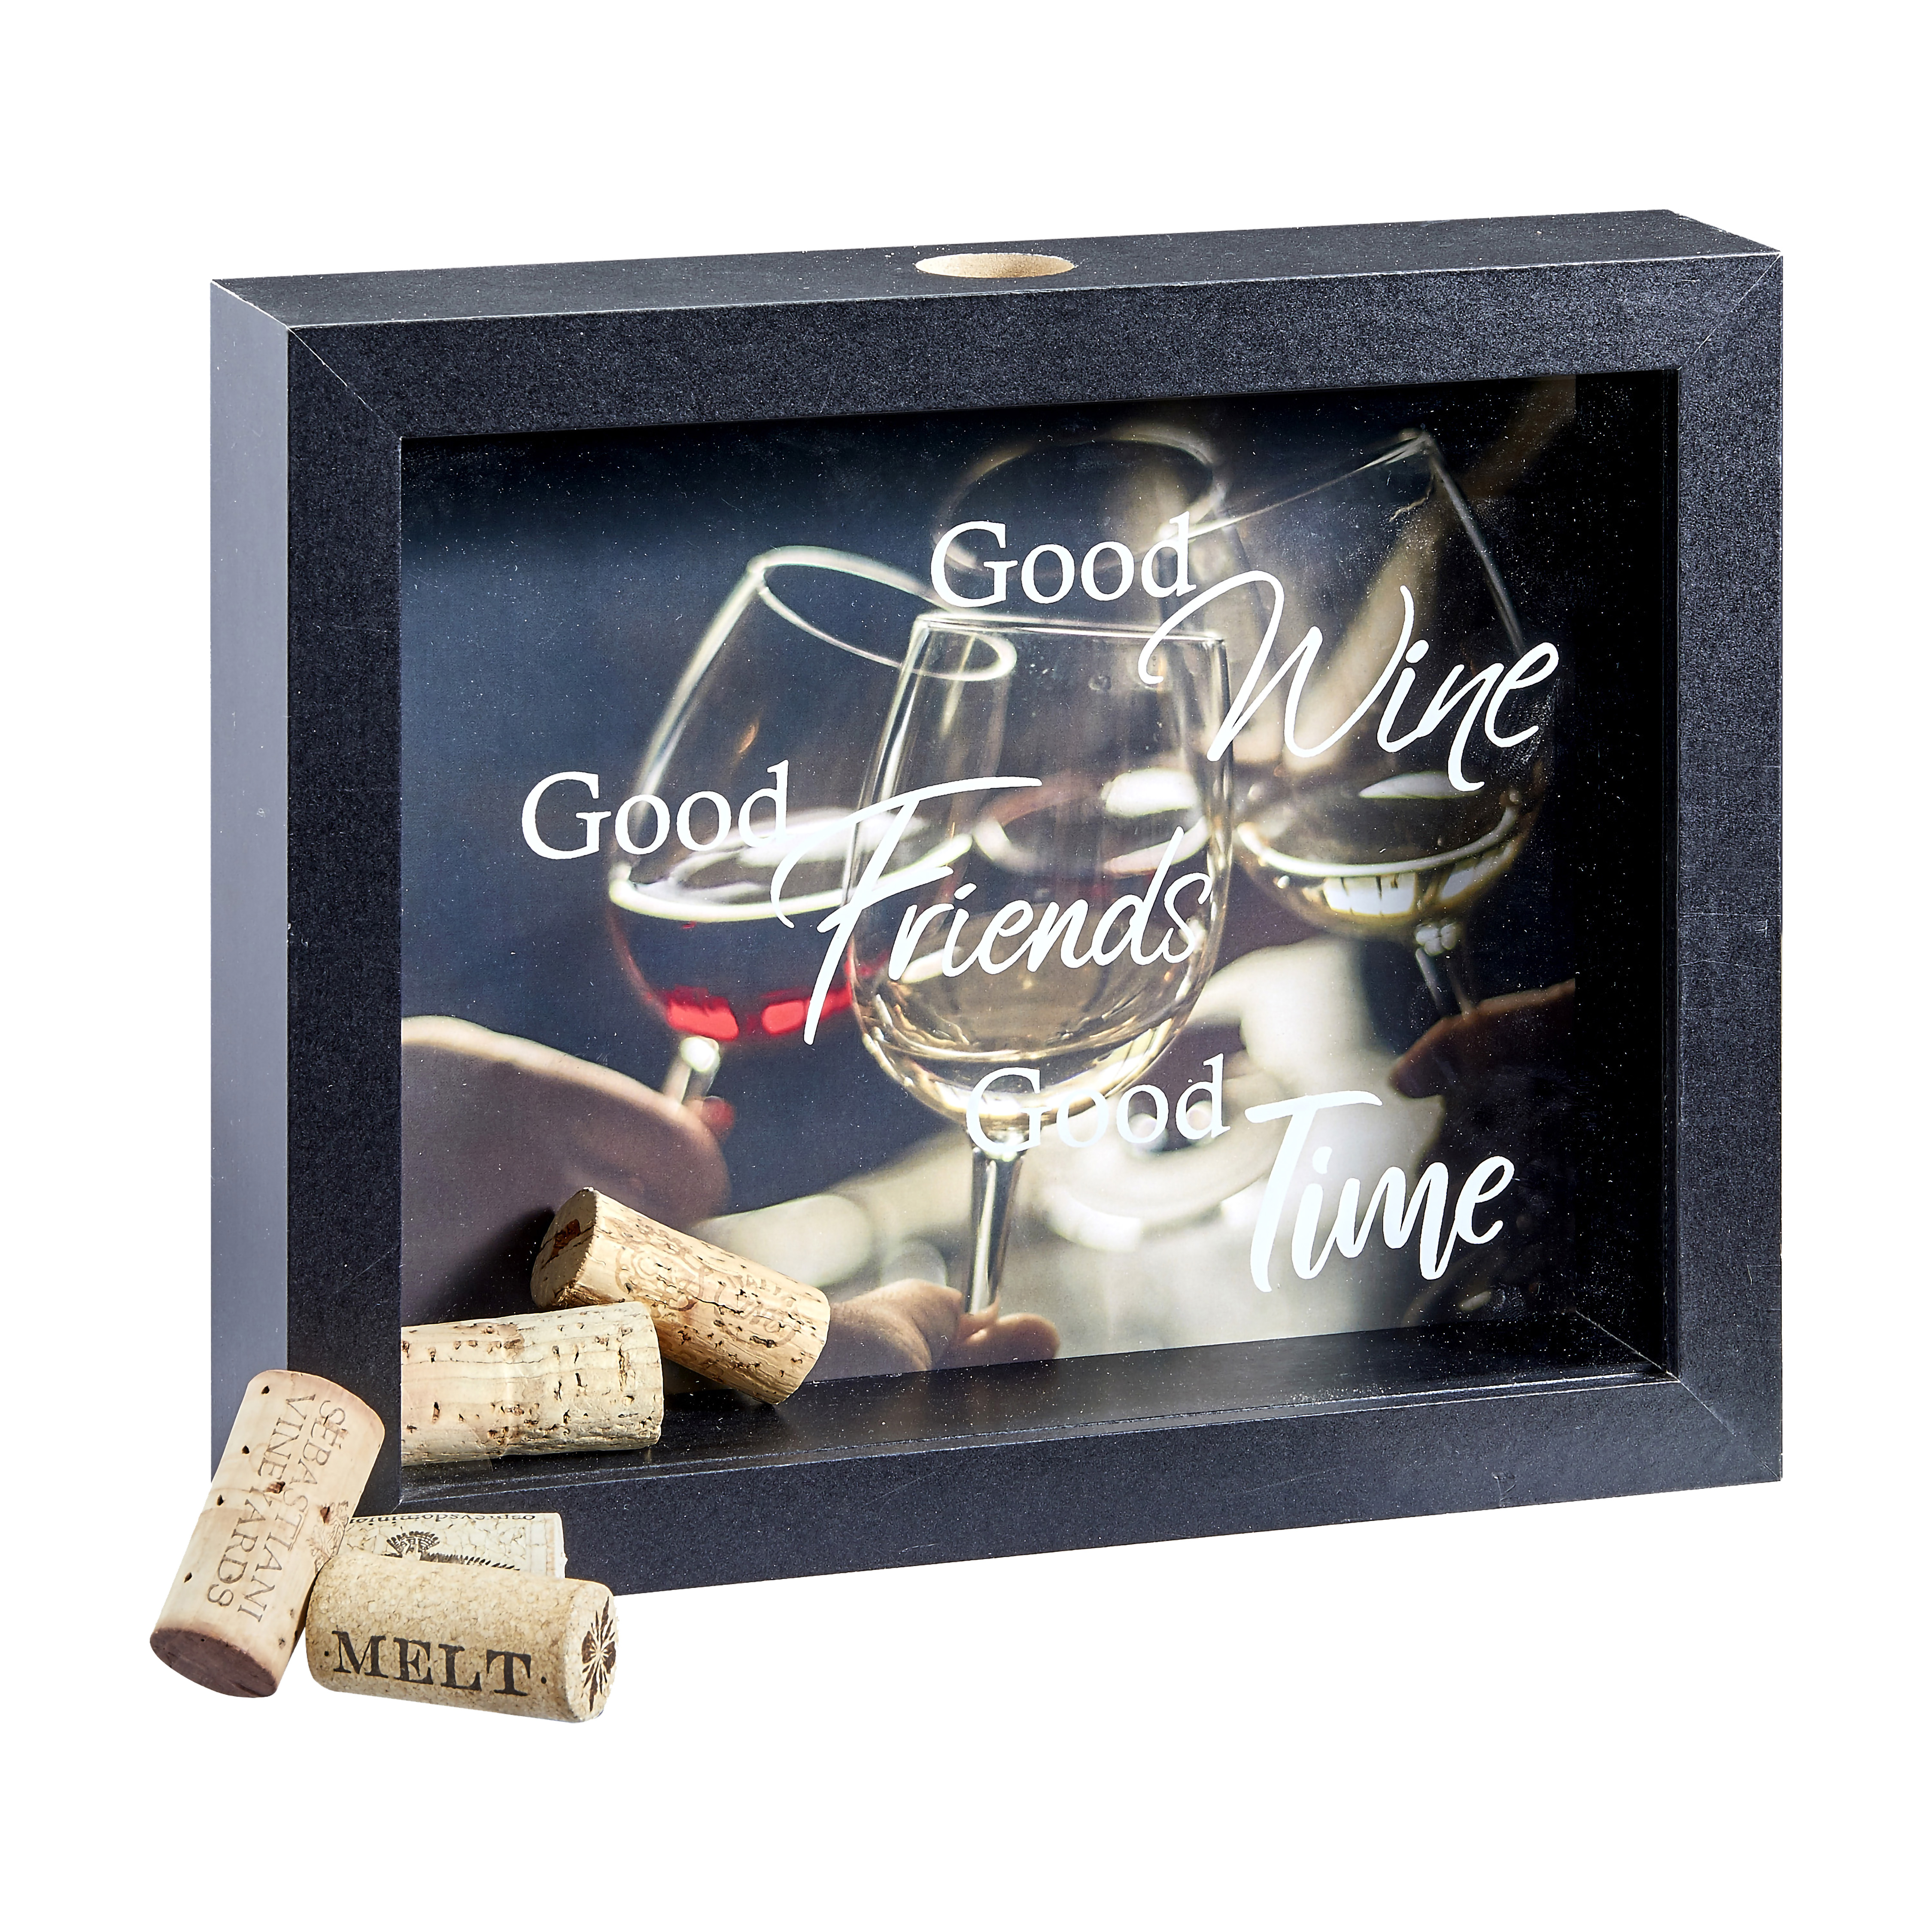 FASHIONCRAFT 82493 Wine Cork Holder, Shadow Box, Wine Lovers’ Gift, Anniversary Favors, Wedding Favors - image 1 of 5